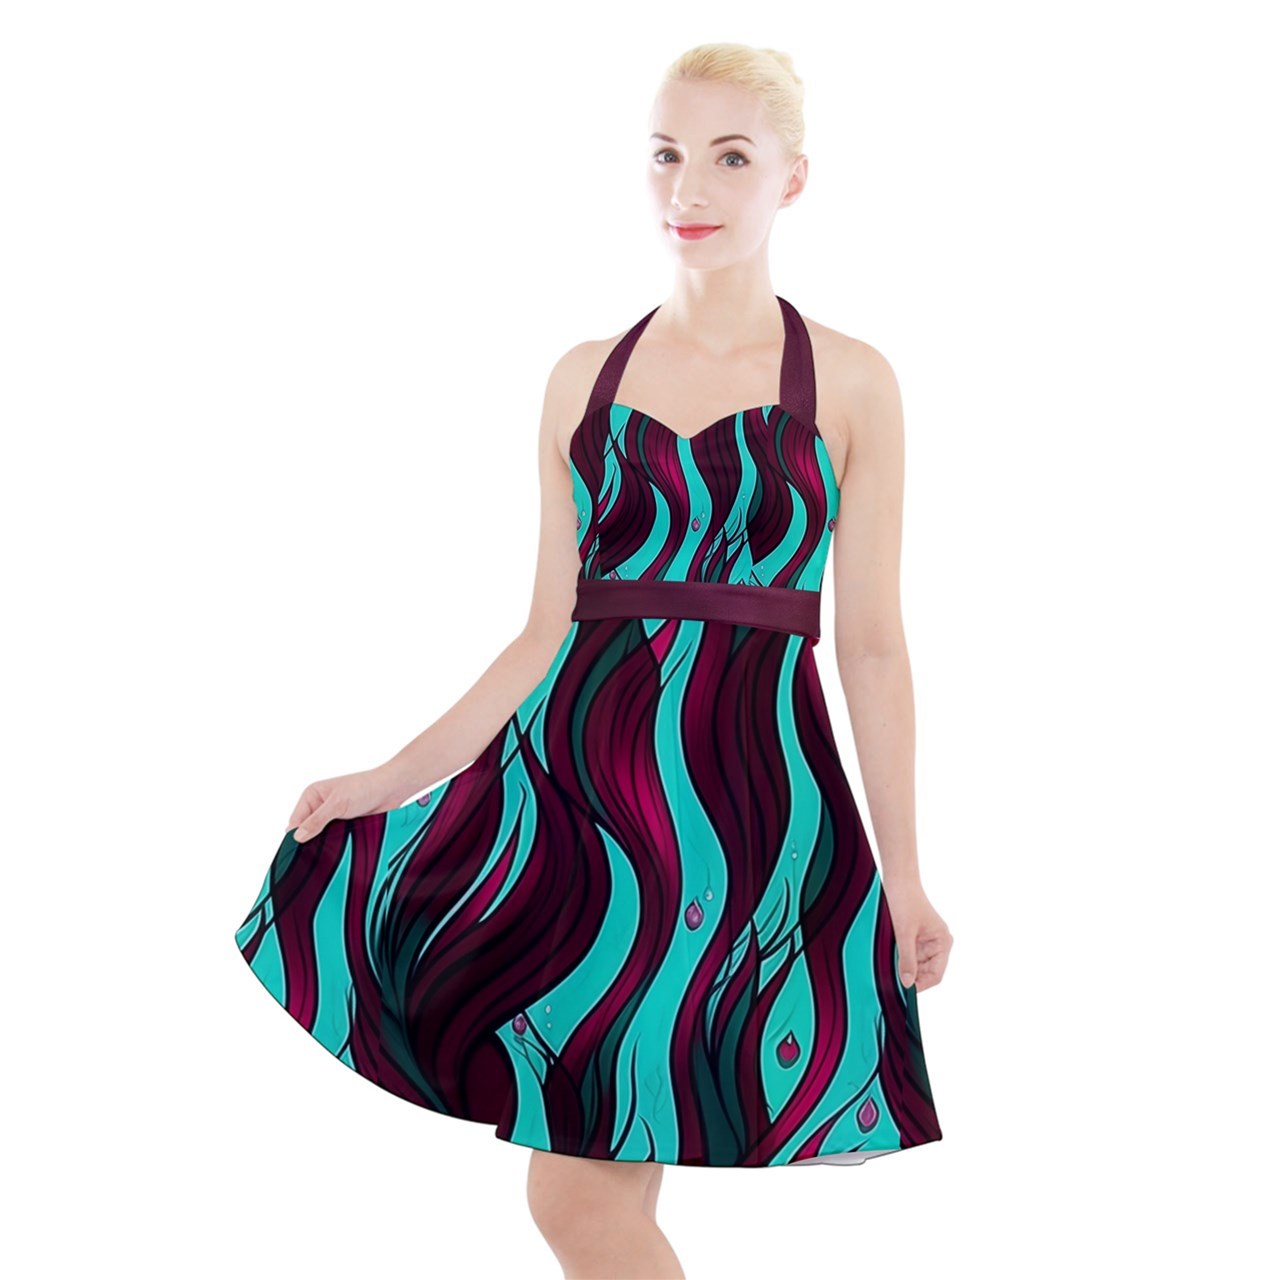 Primary image for NEW! Women's Vintage Modern Halter Party Swing Dress Regular and Plus Available!